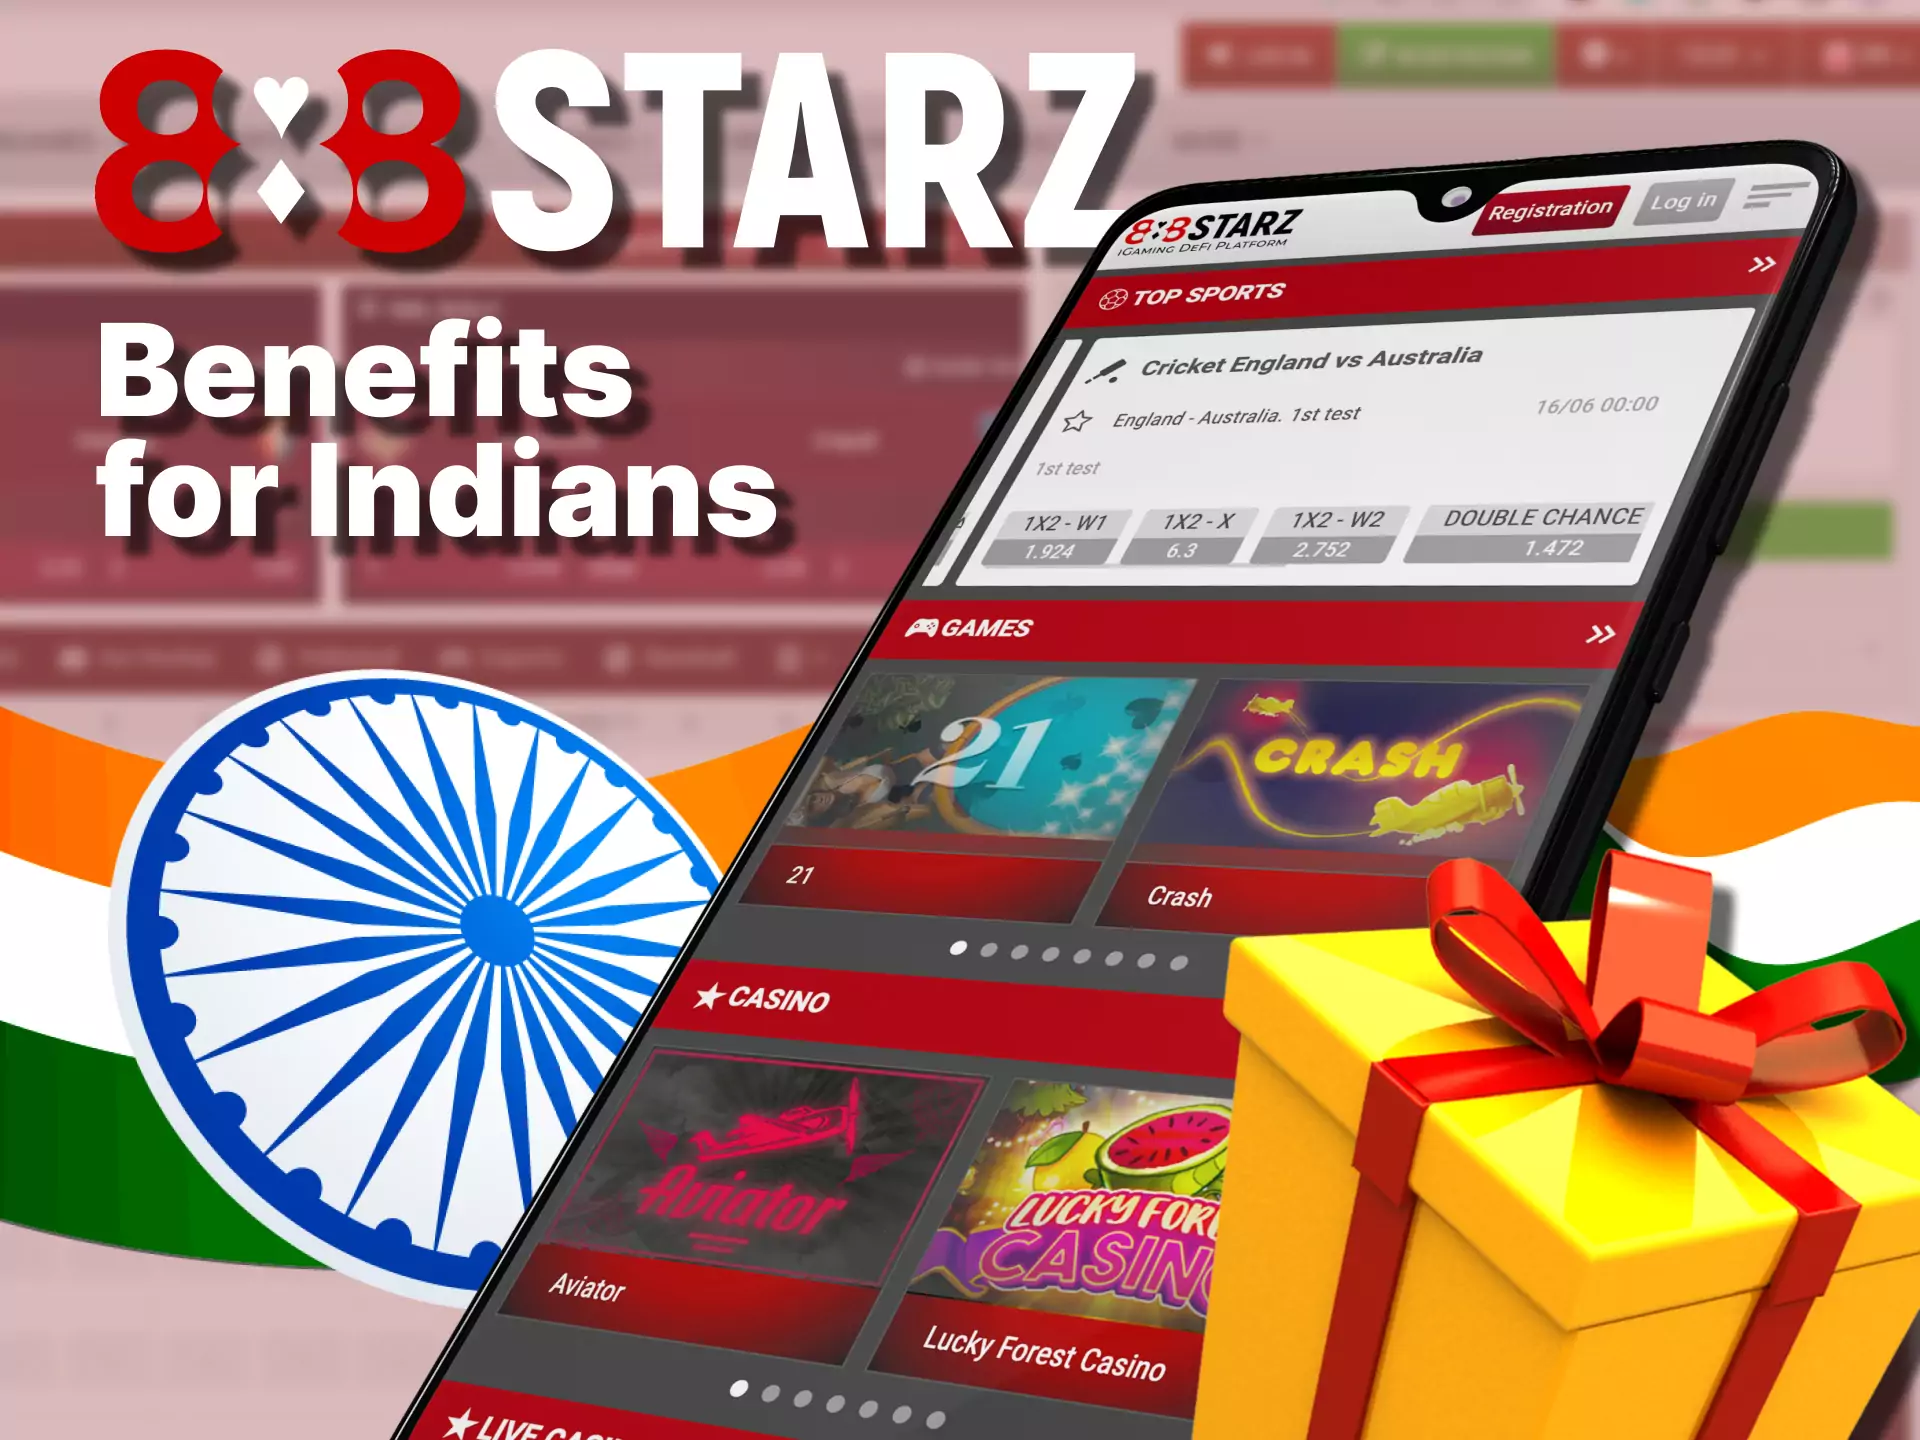 888starz app offers many benefits and bonuses to players.